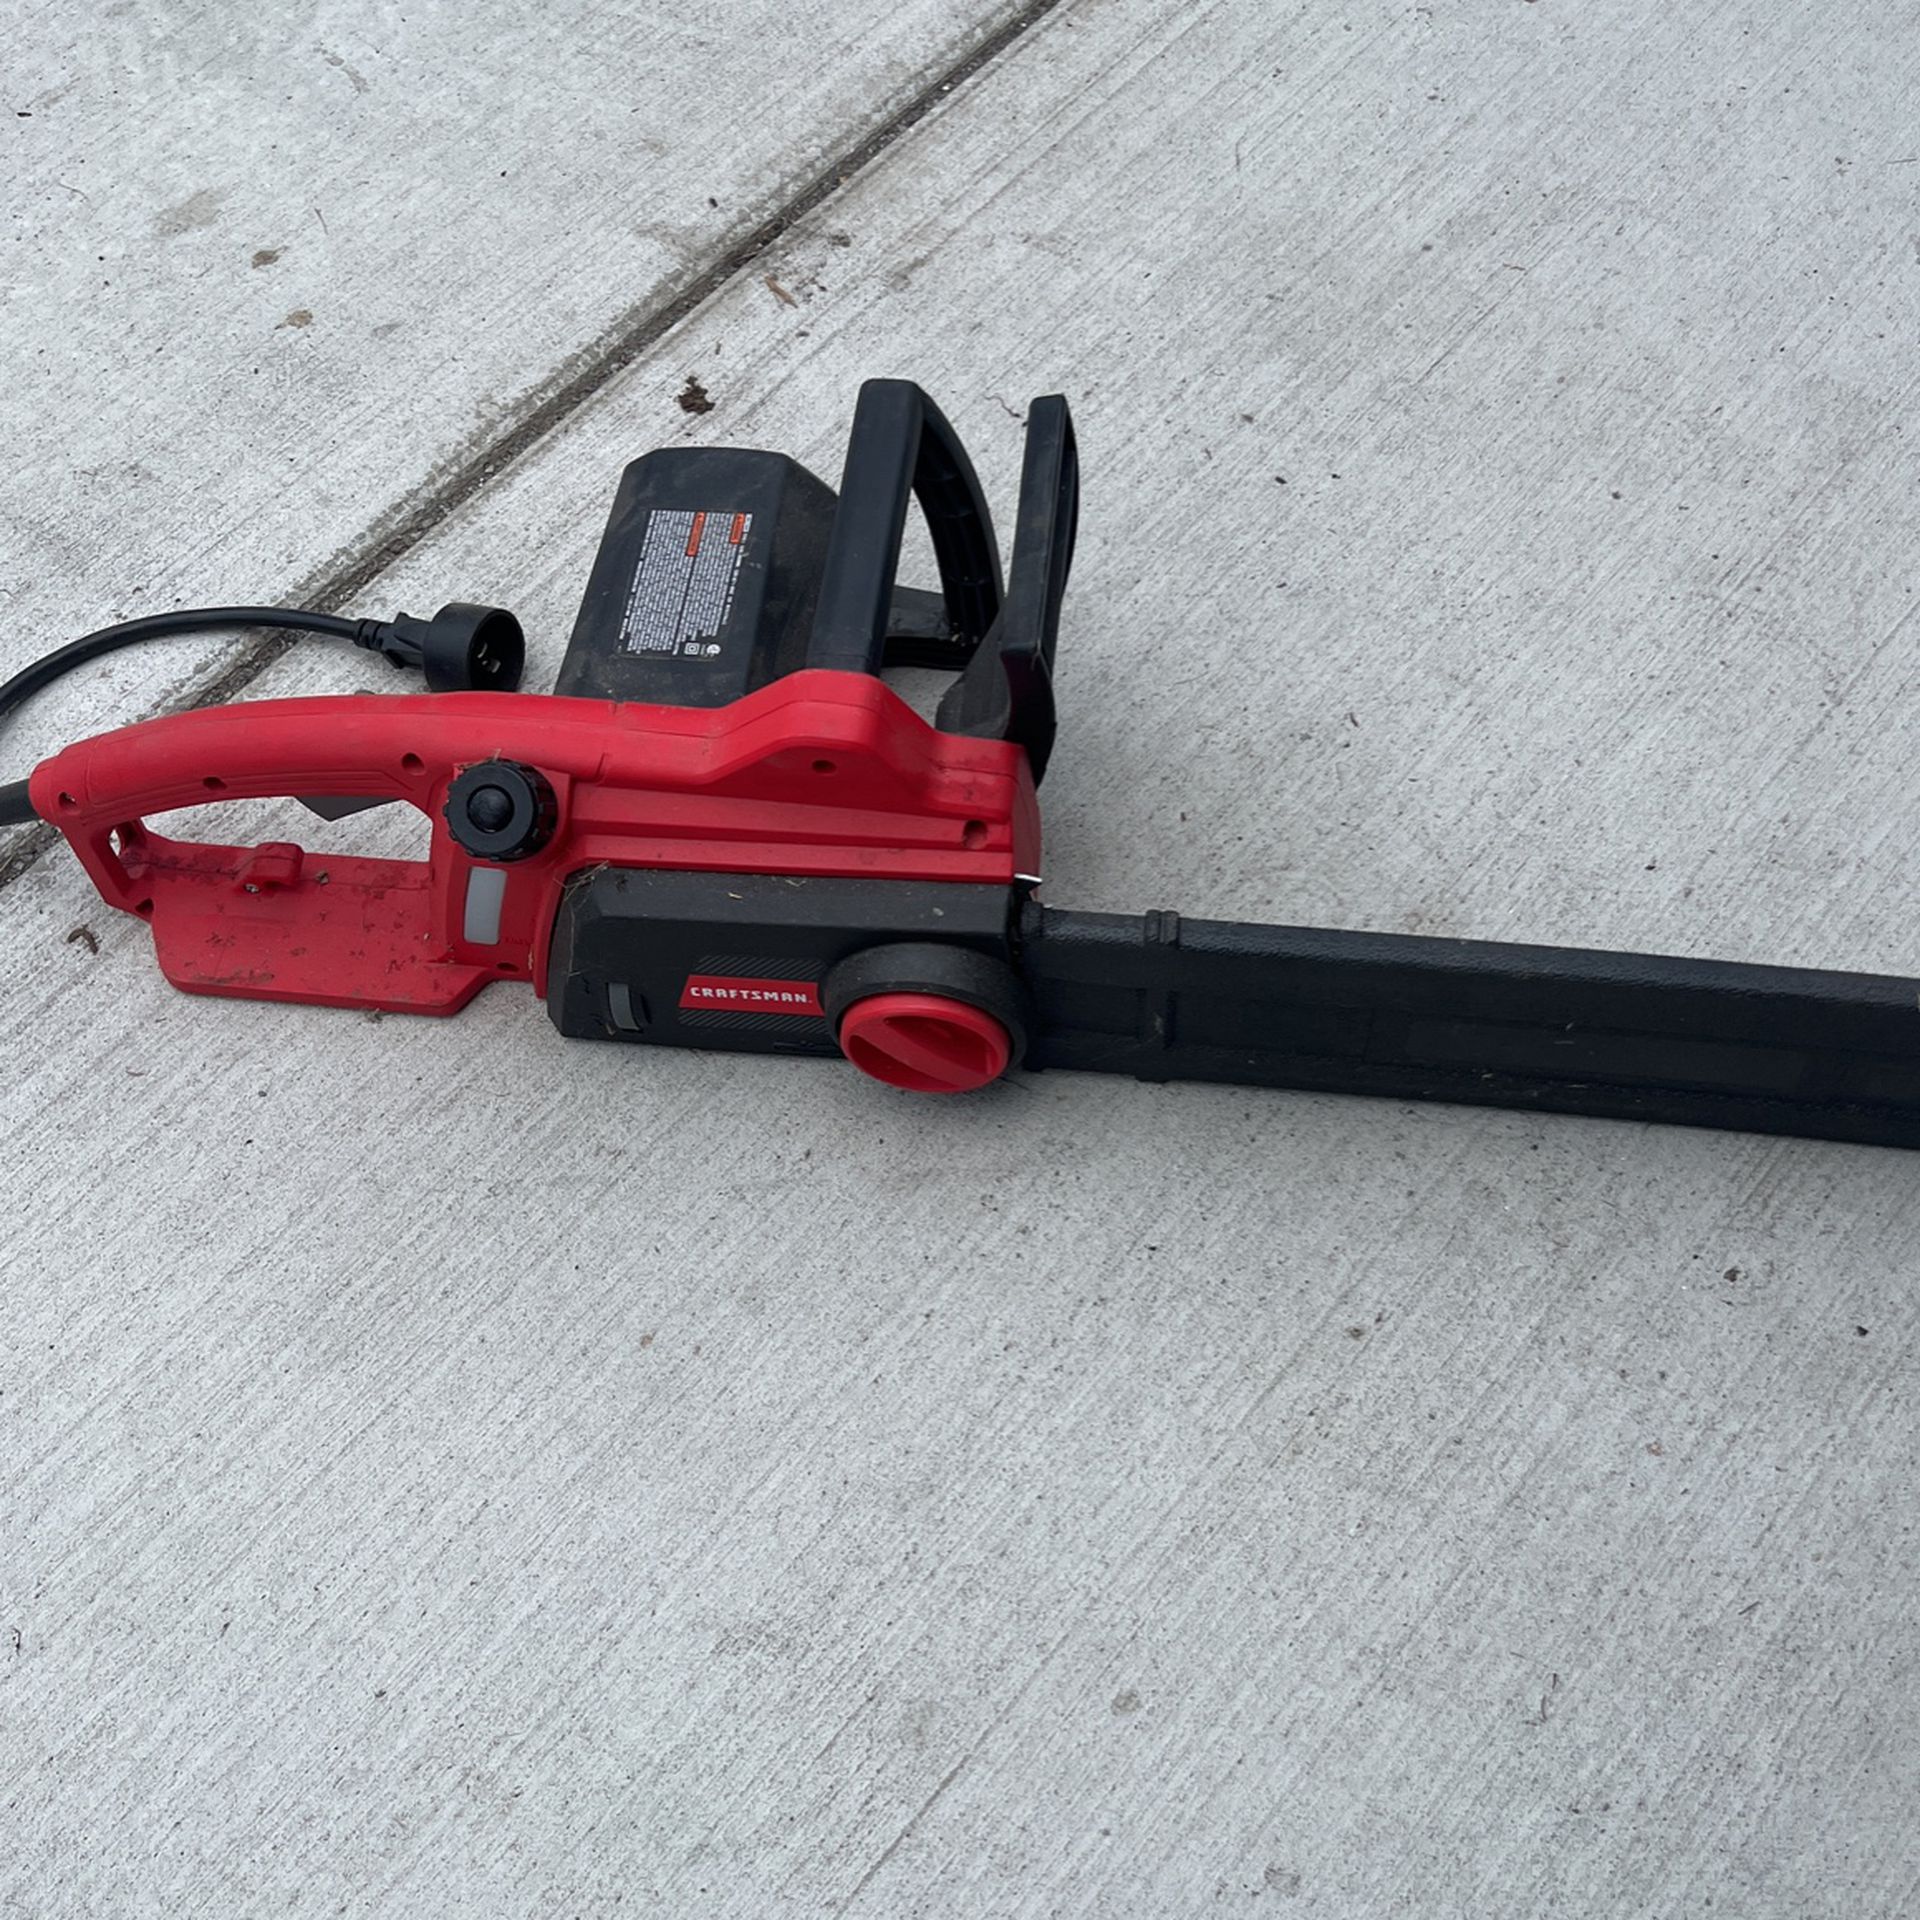 CRAFTSMAN 8 Amps 14-in Corded Electric Chainsaw